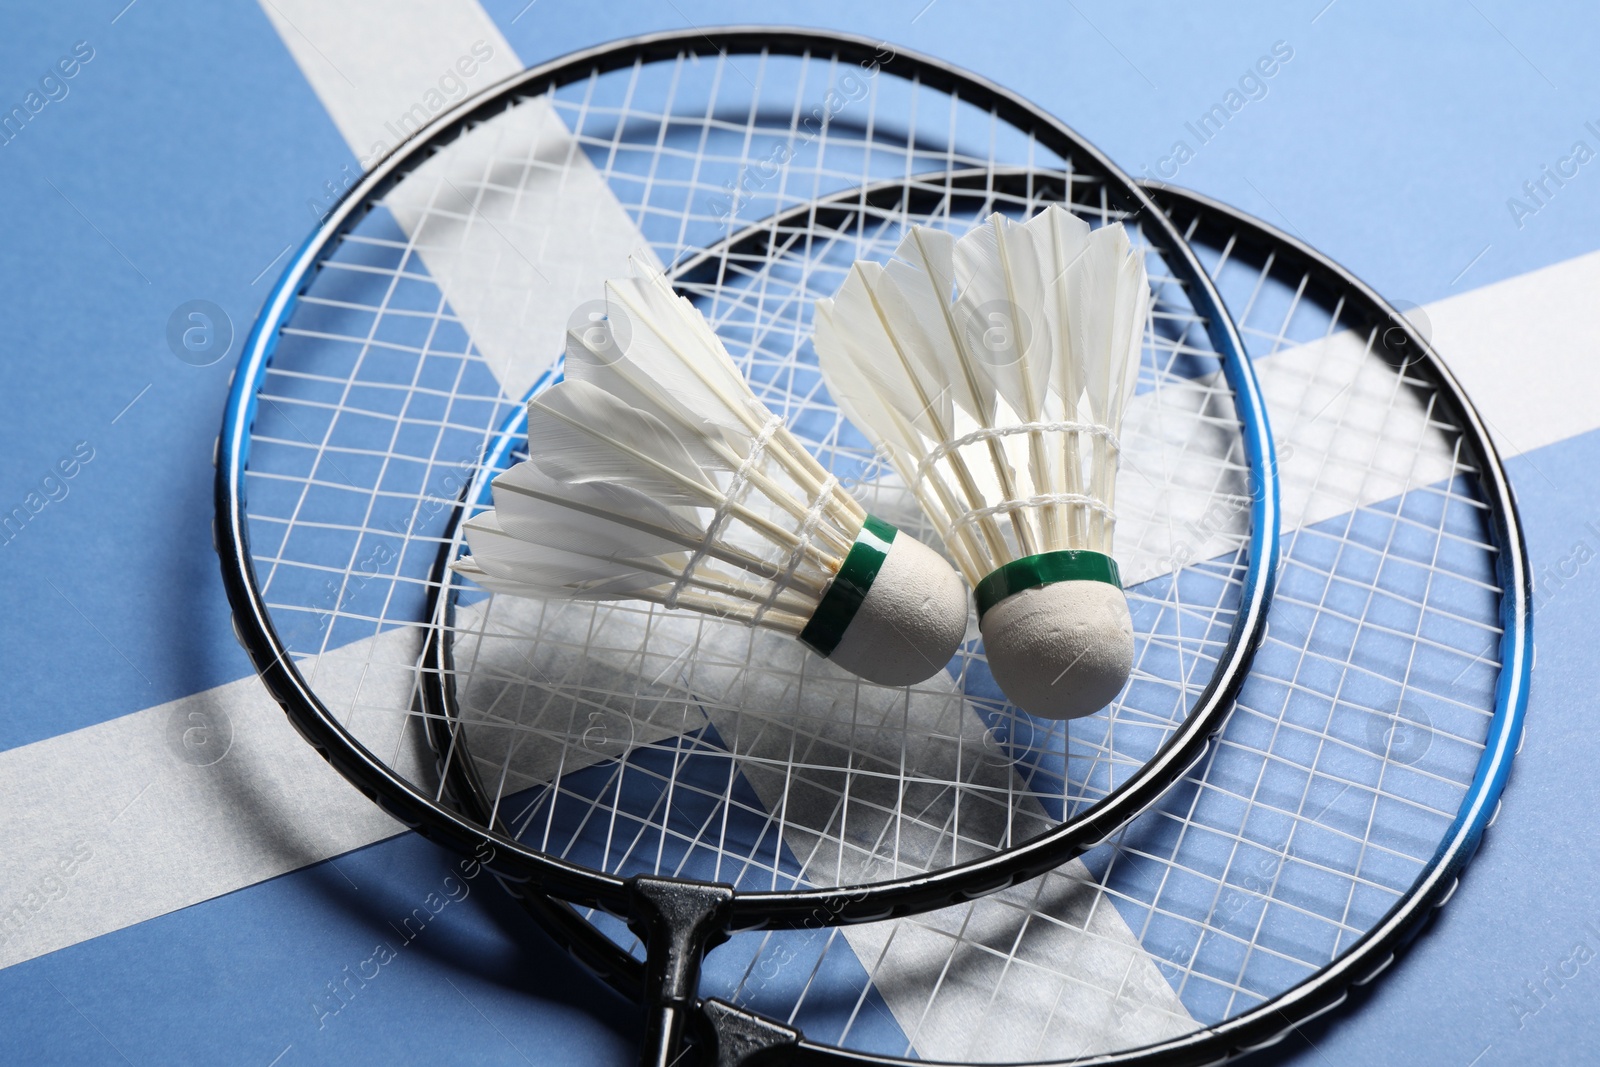 Photo of Feather badminton shuttlecocks and rackets on blue background, closeup